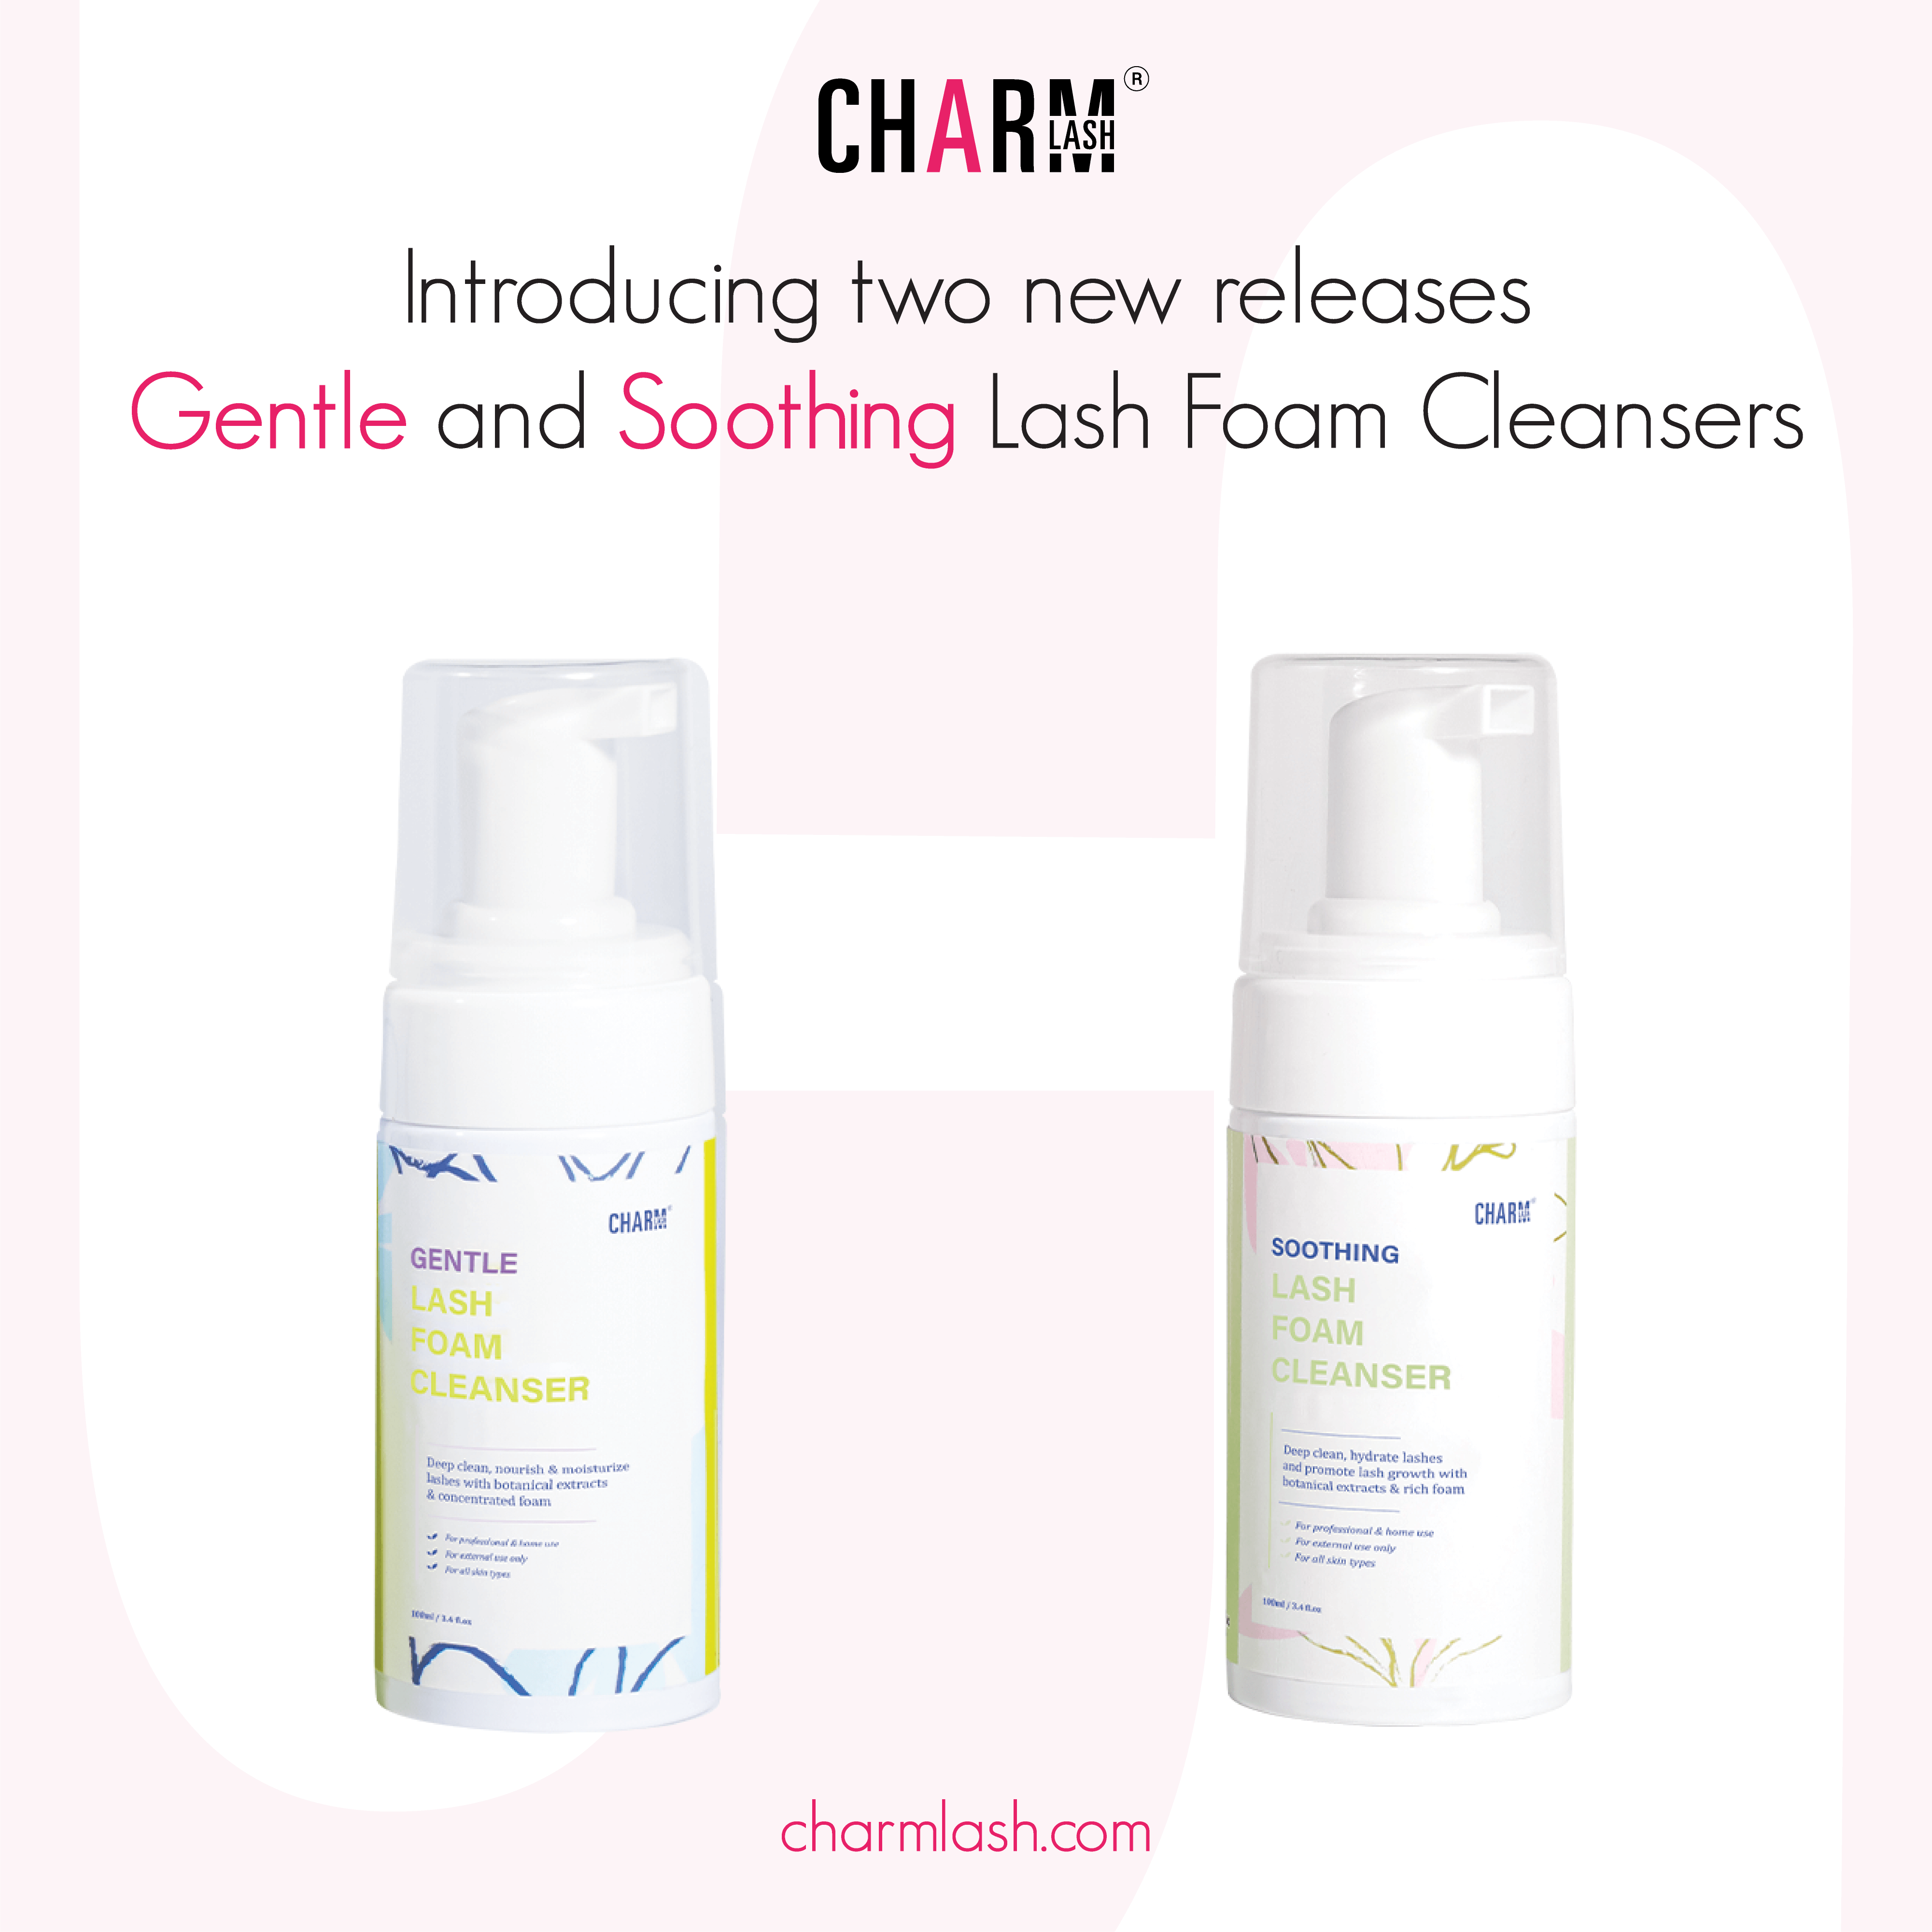 Gentle and Soothing lash foam cleanser